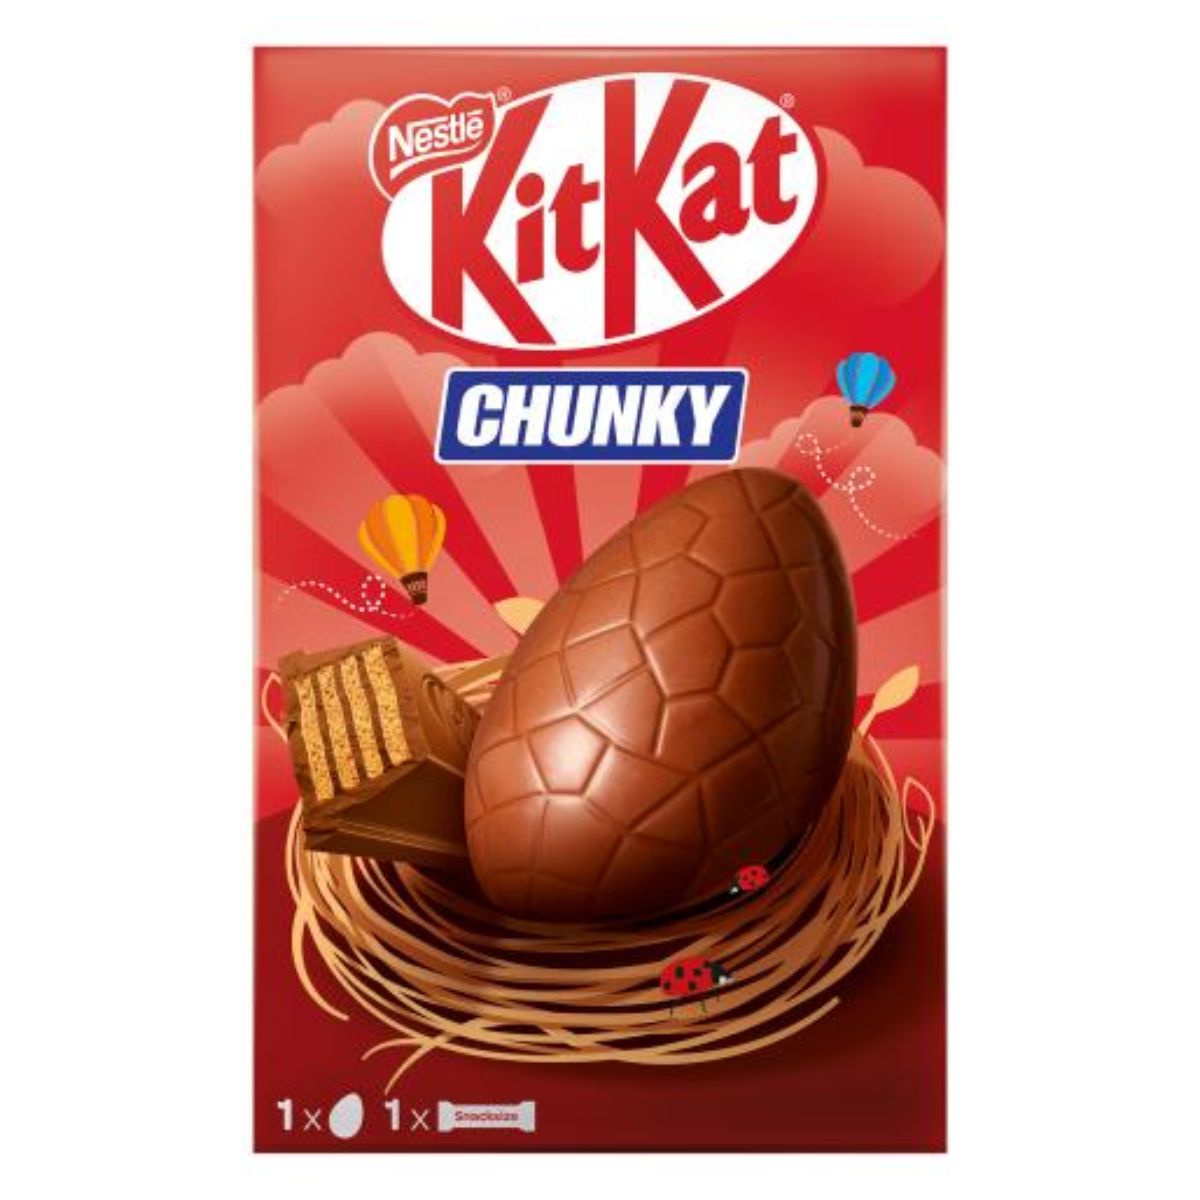 Packaging for Kit Kat Chunky - 129g featuring a chocolate Easter egg in a nest with hot air balloons in the background.